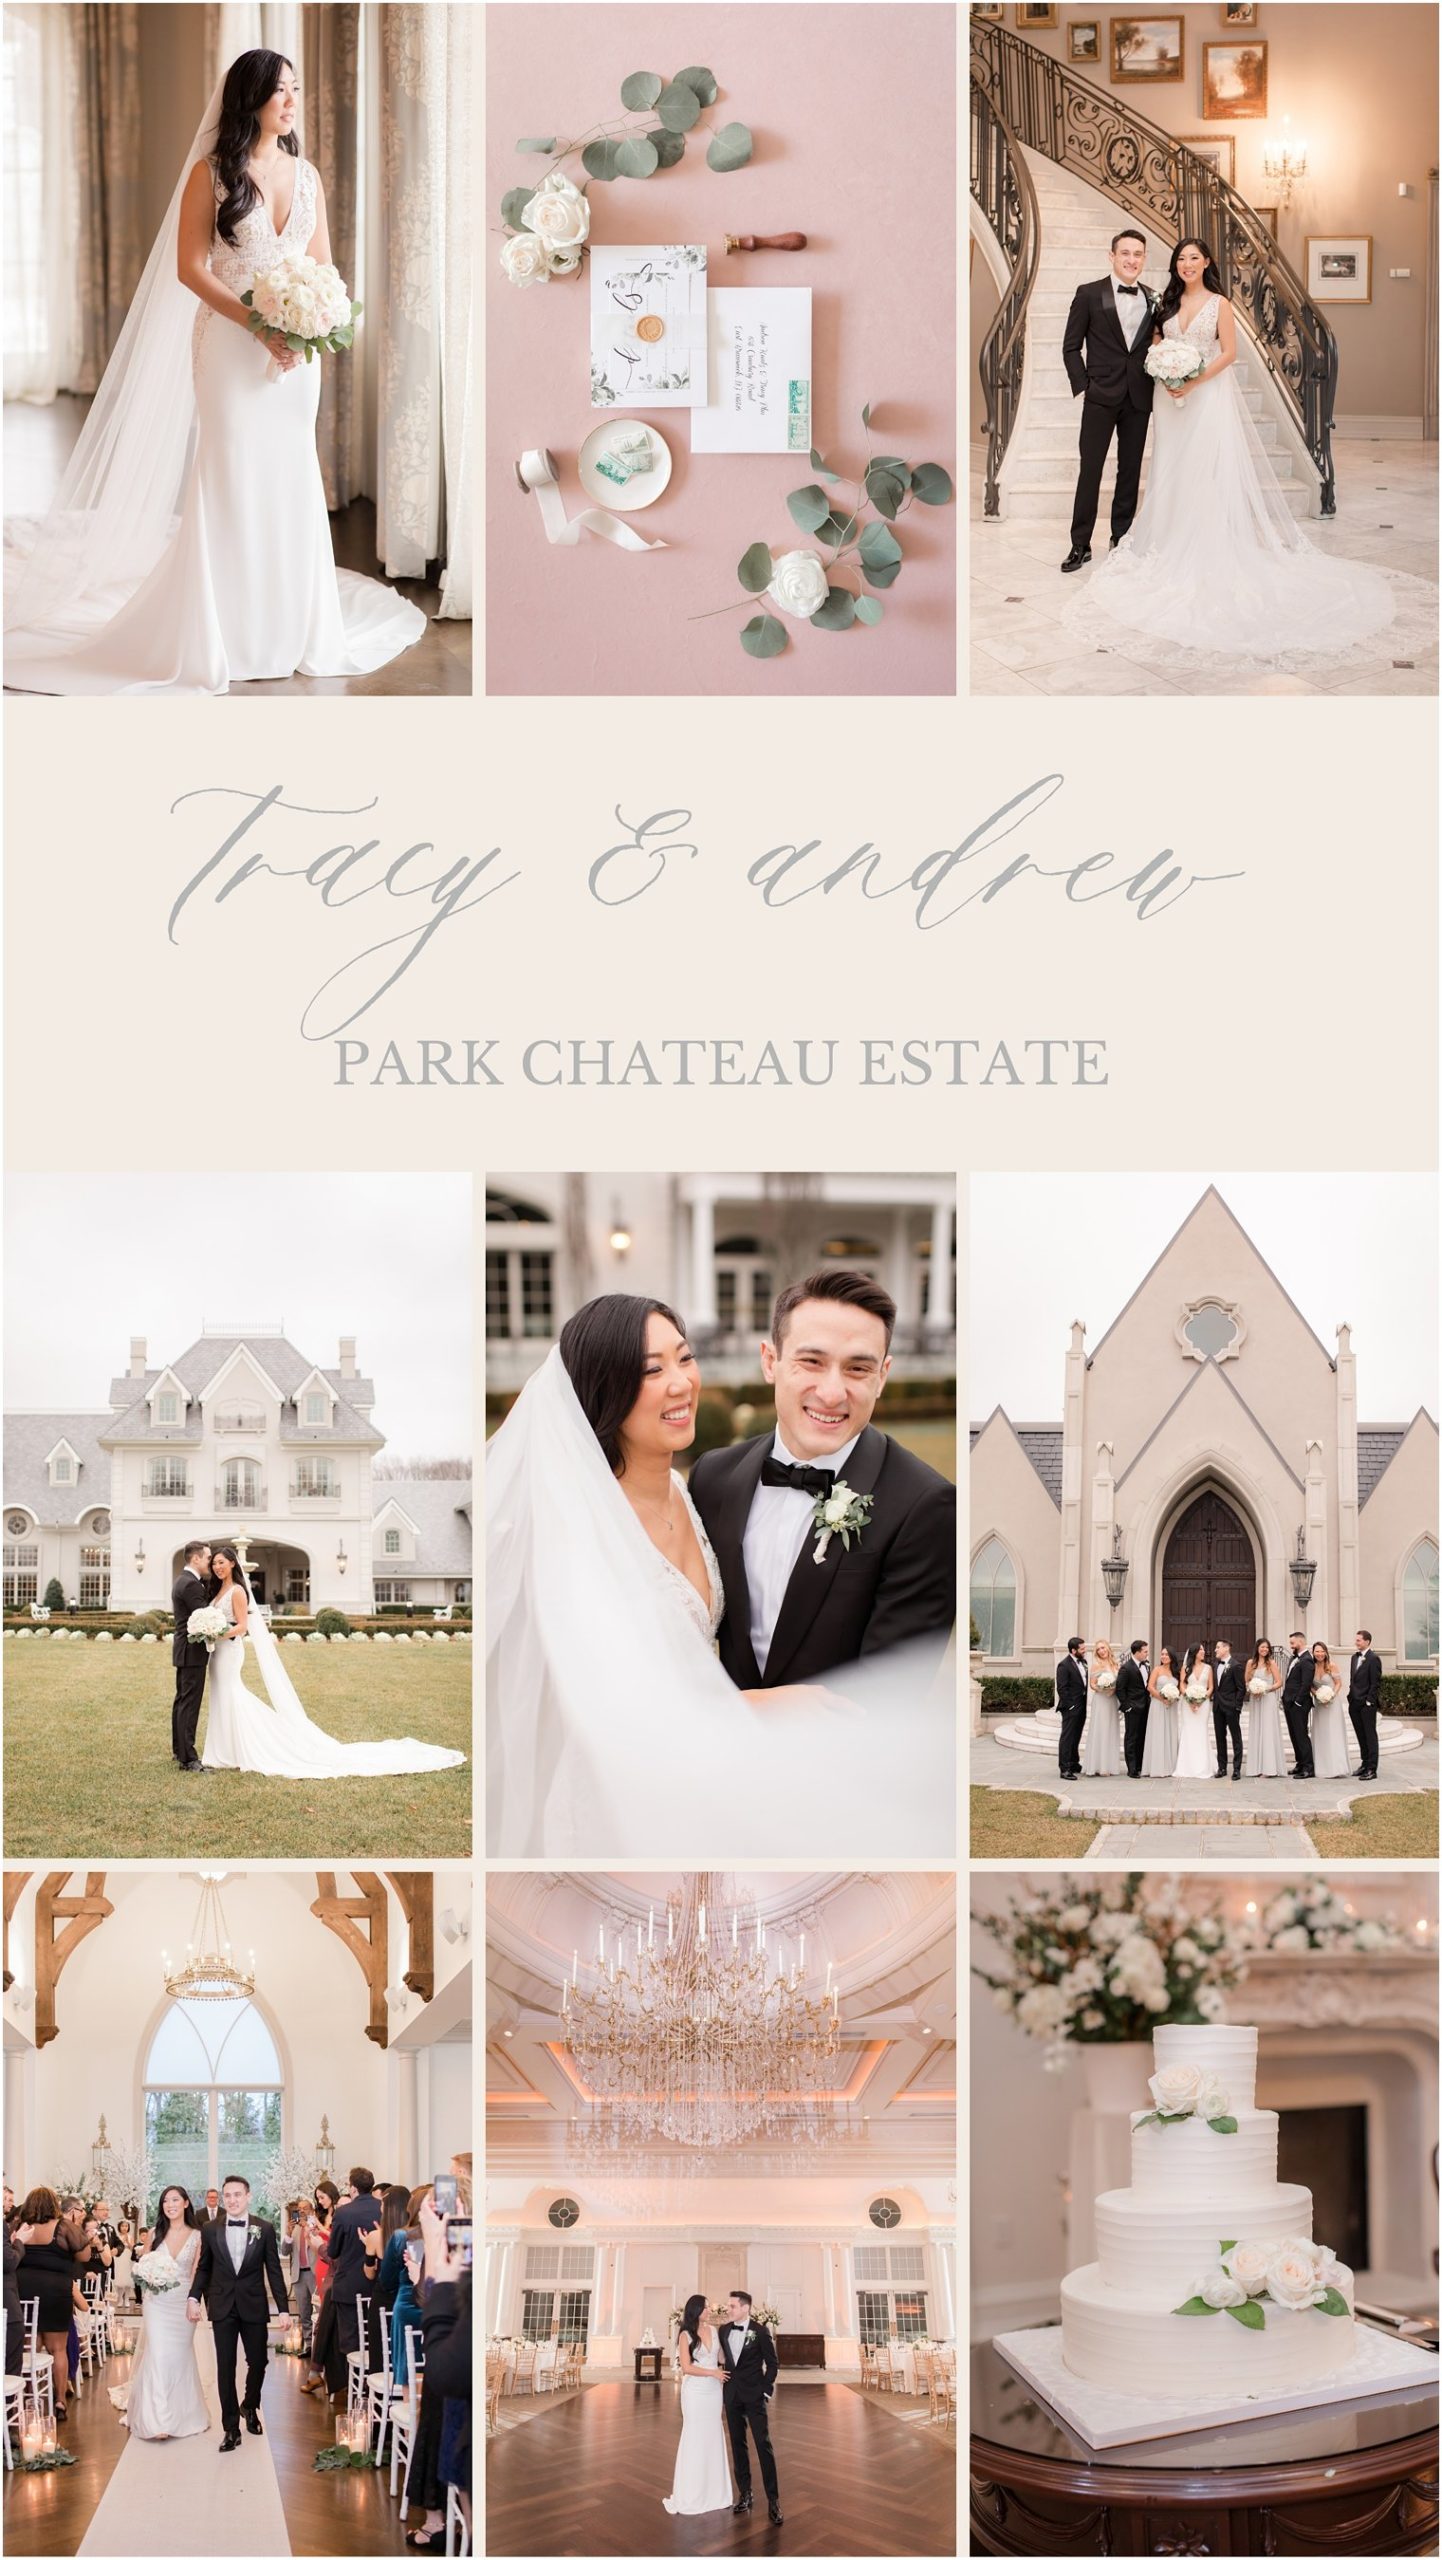 Winter wedding at Park Chateau Estate